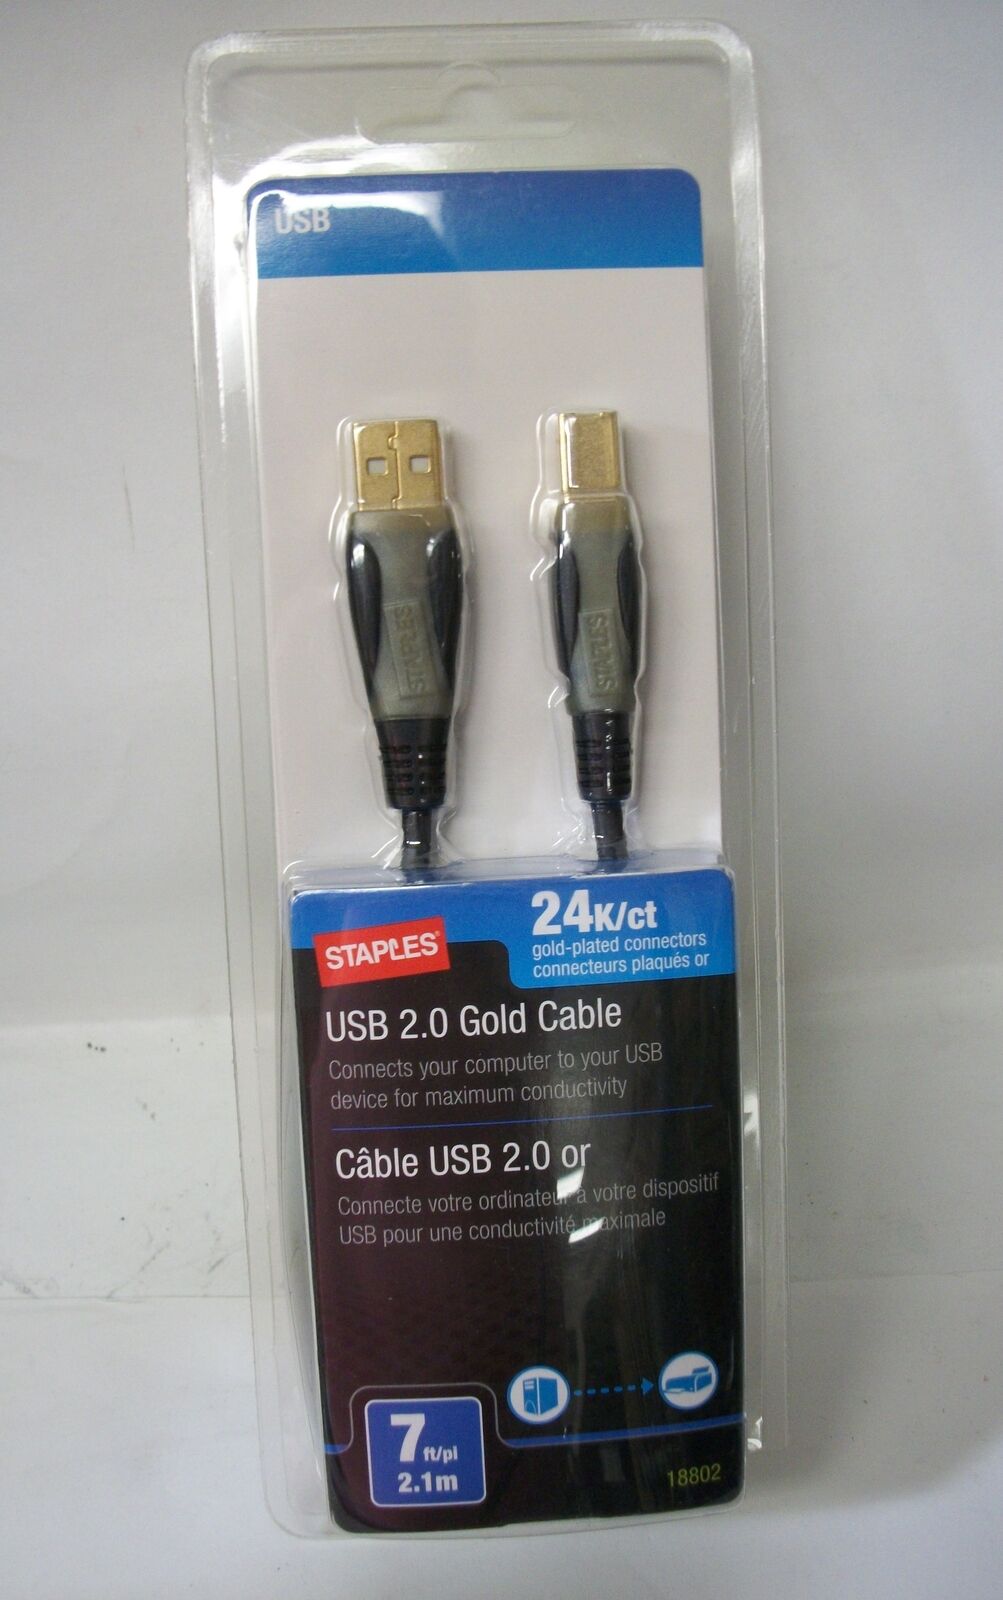 Staples (R) USB 2.0 Gold Cable 24K/ct Gold-Plated Connectors